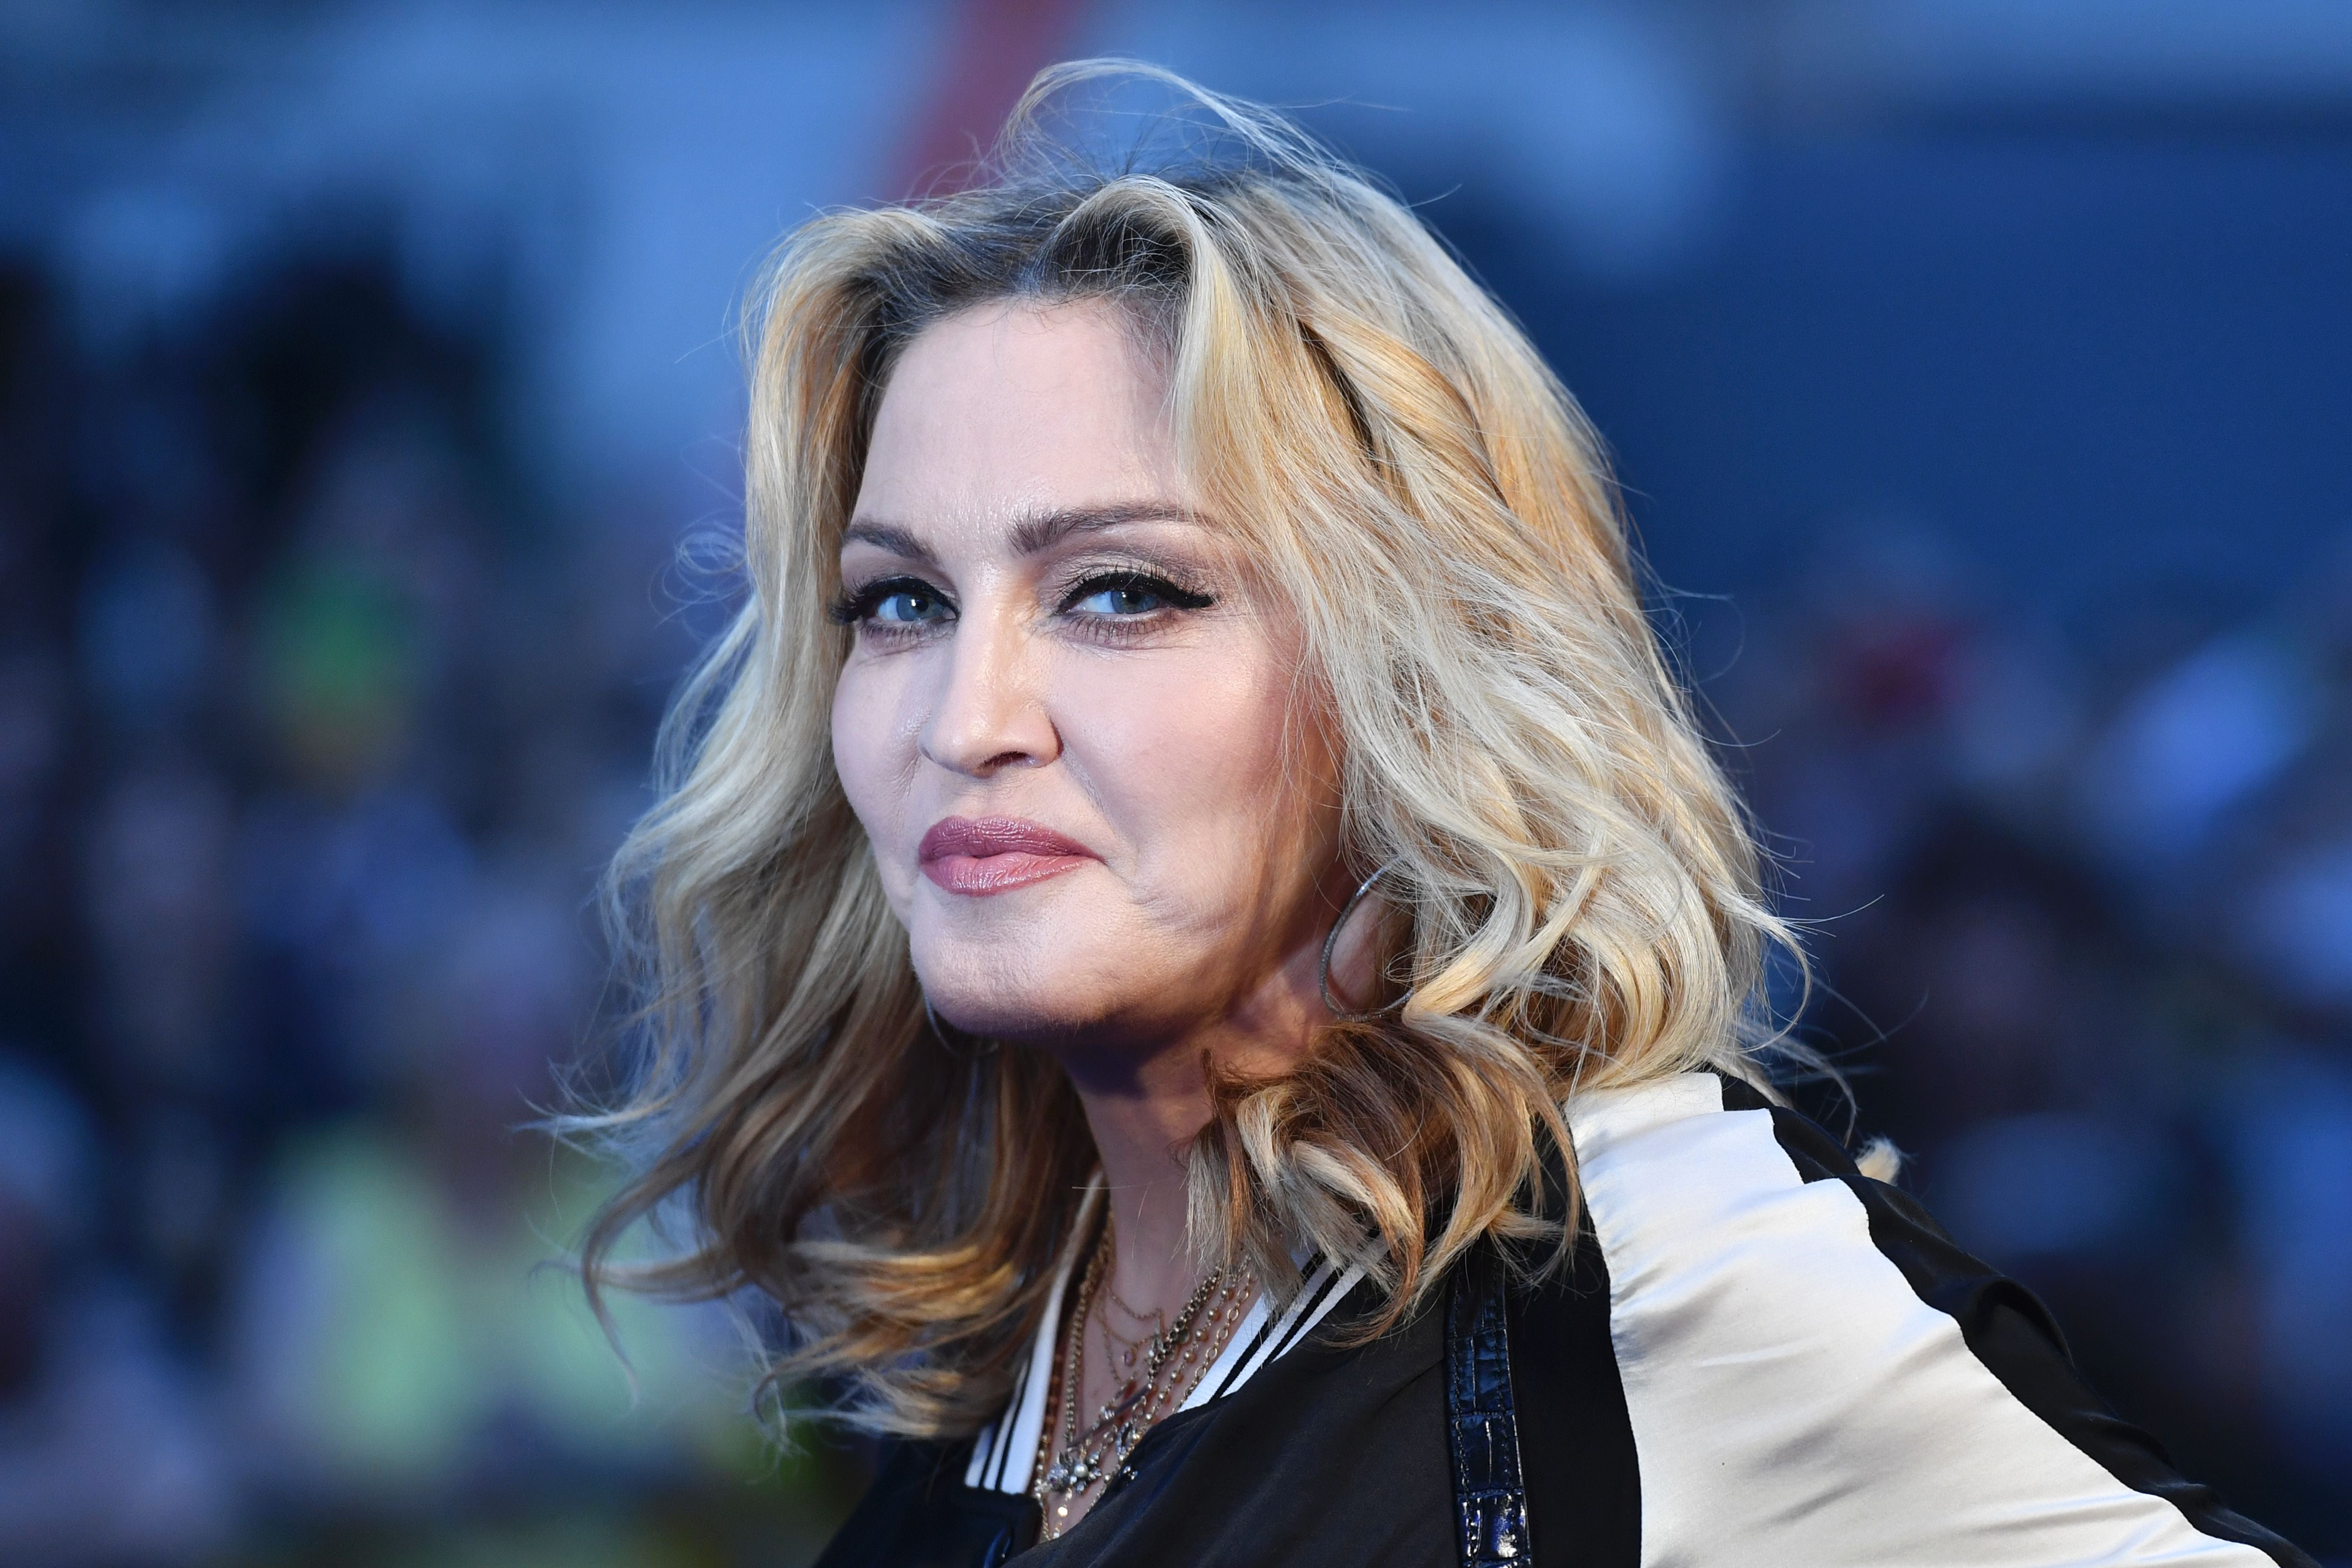 File image: Madonna at a special screening of “The Beatles Eight Days A Week: The Touring Years” in London in 2016